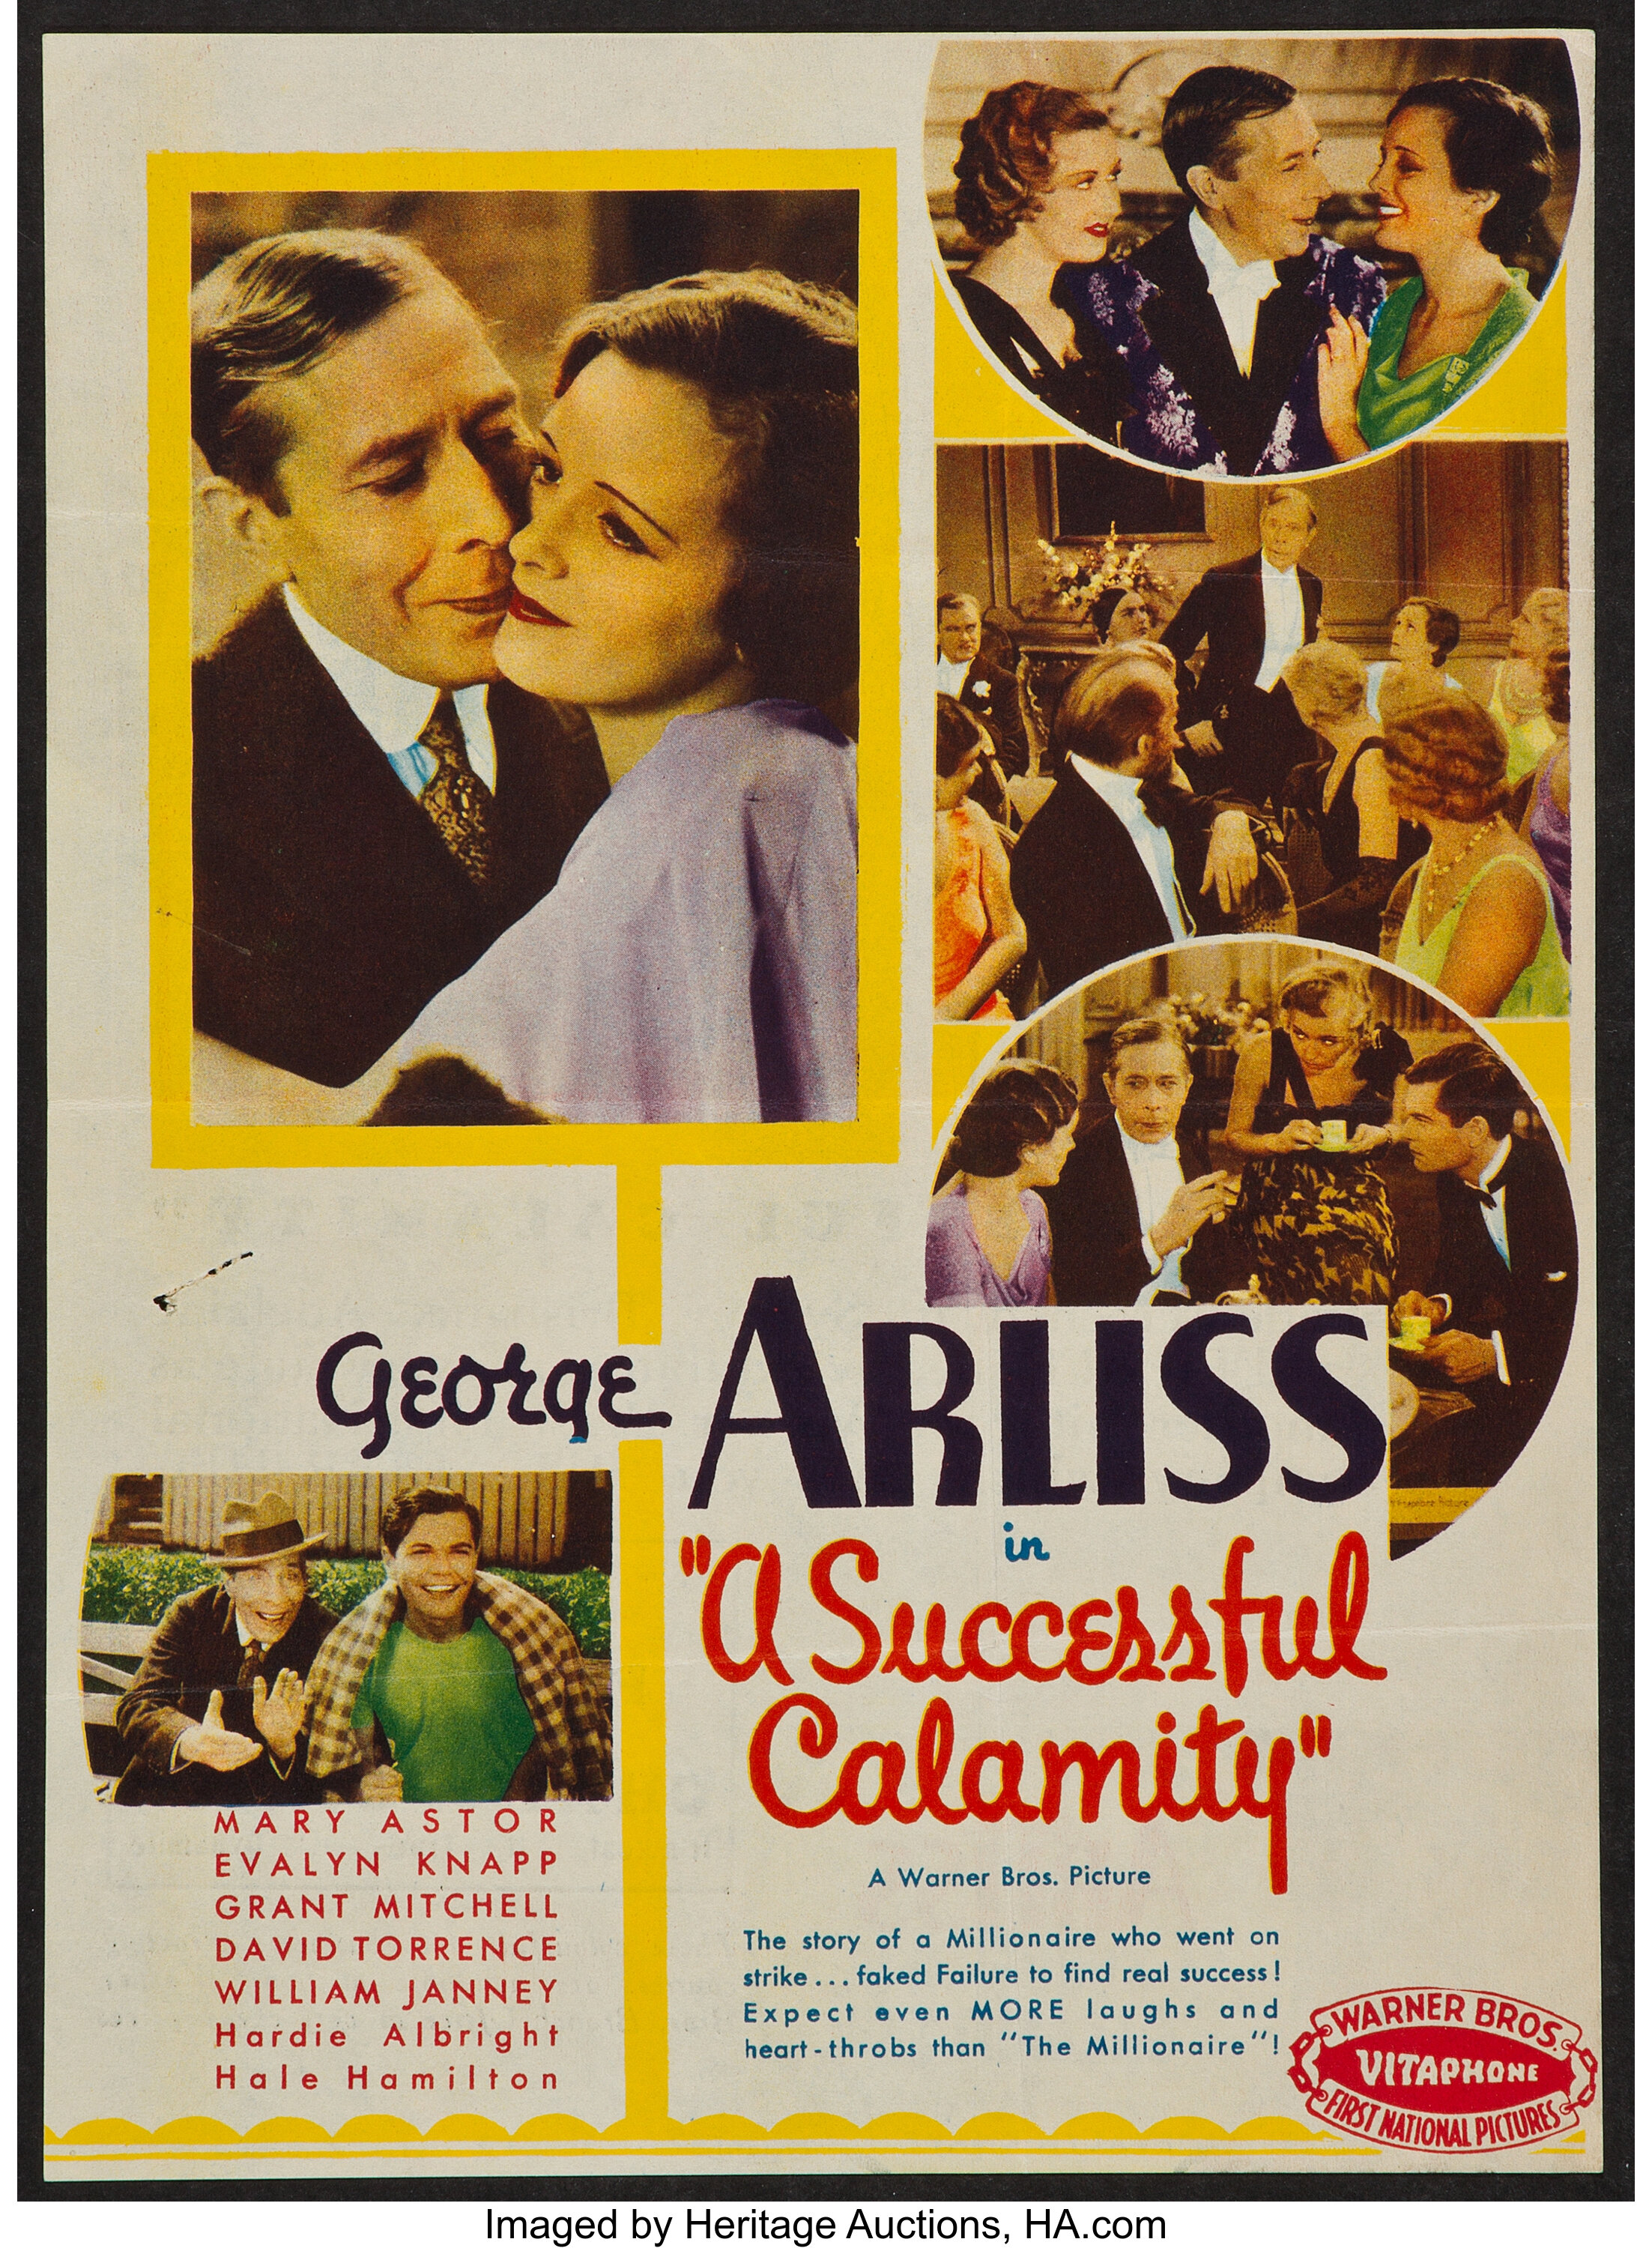 A Successful Calamity (Warner Brothers, 1932). Australian Herald | Lot #51335 Heritage Auctions